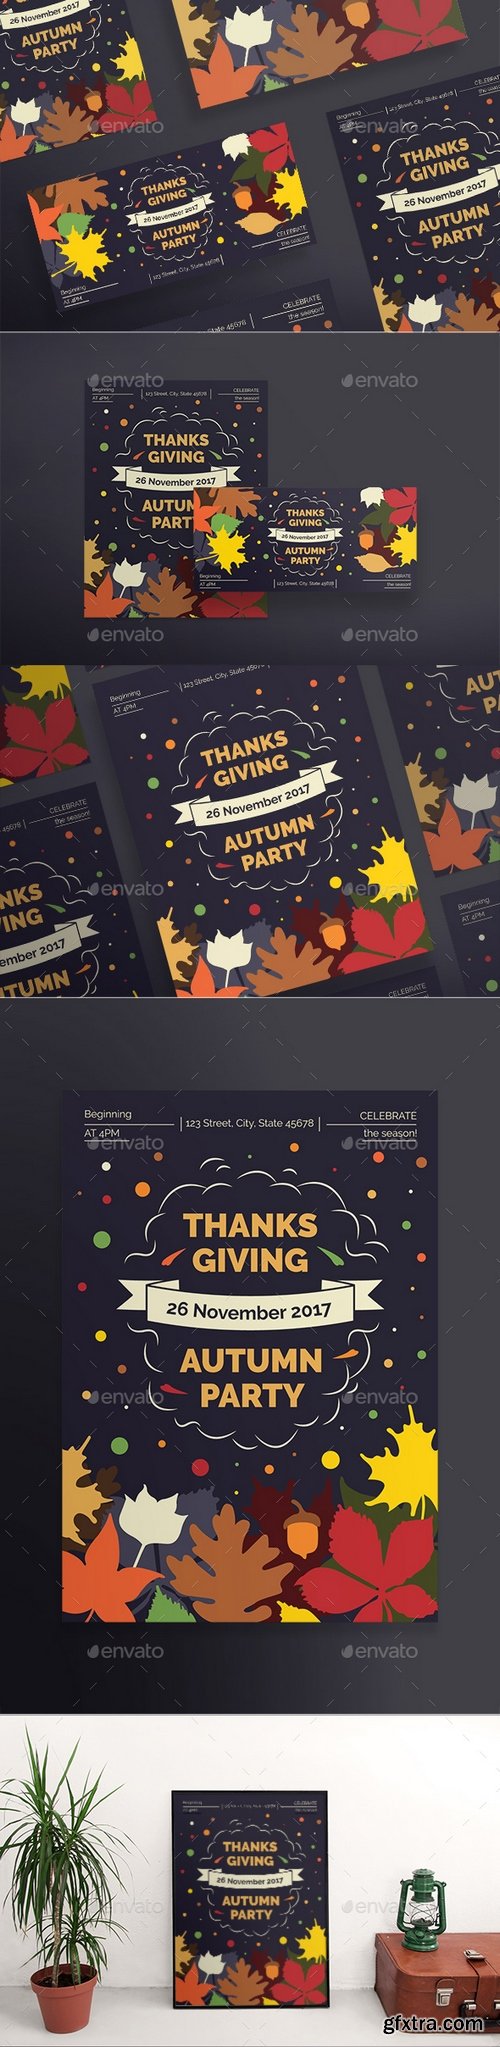 Graphicriver - Thanksgiving Party Flyers 20652679